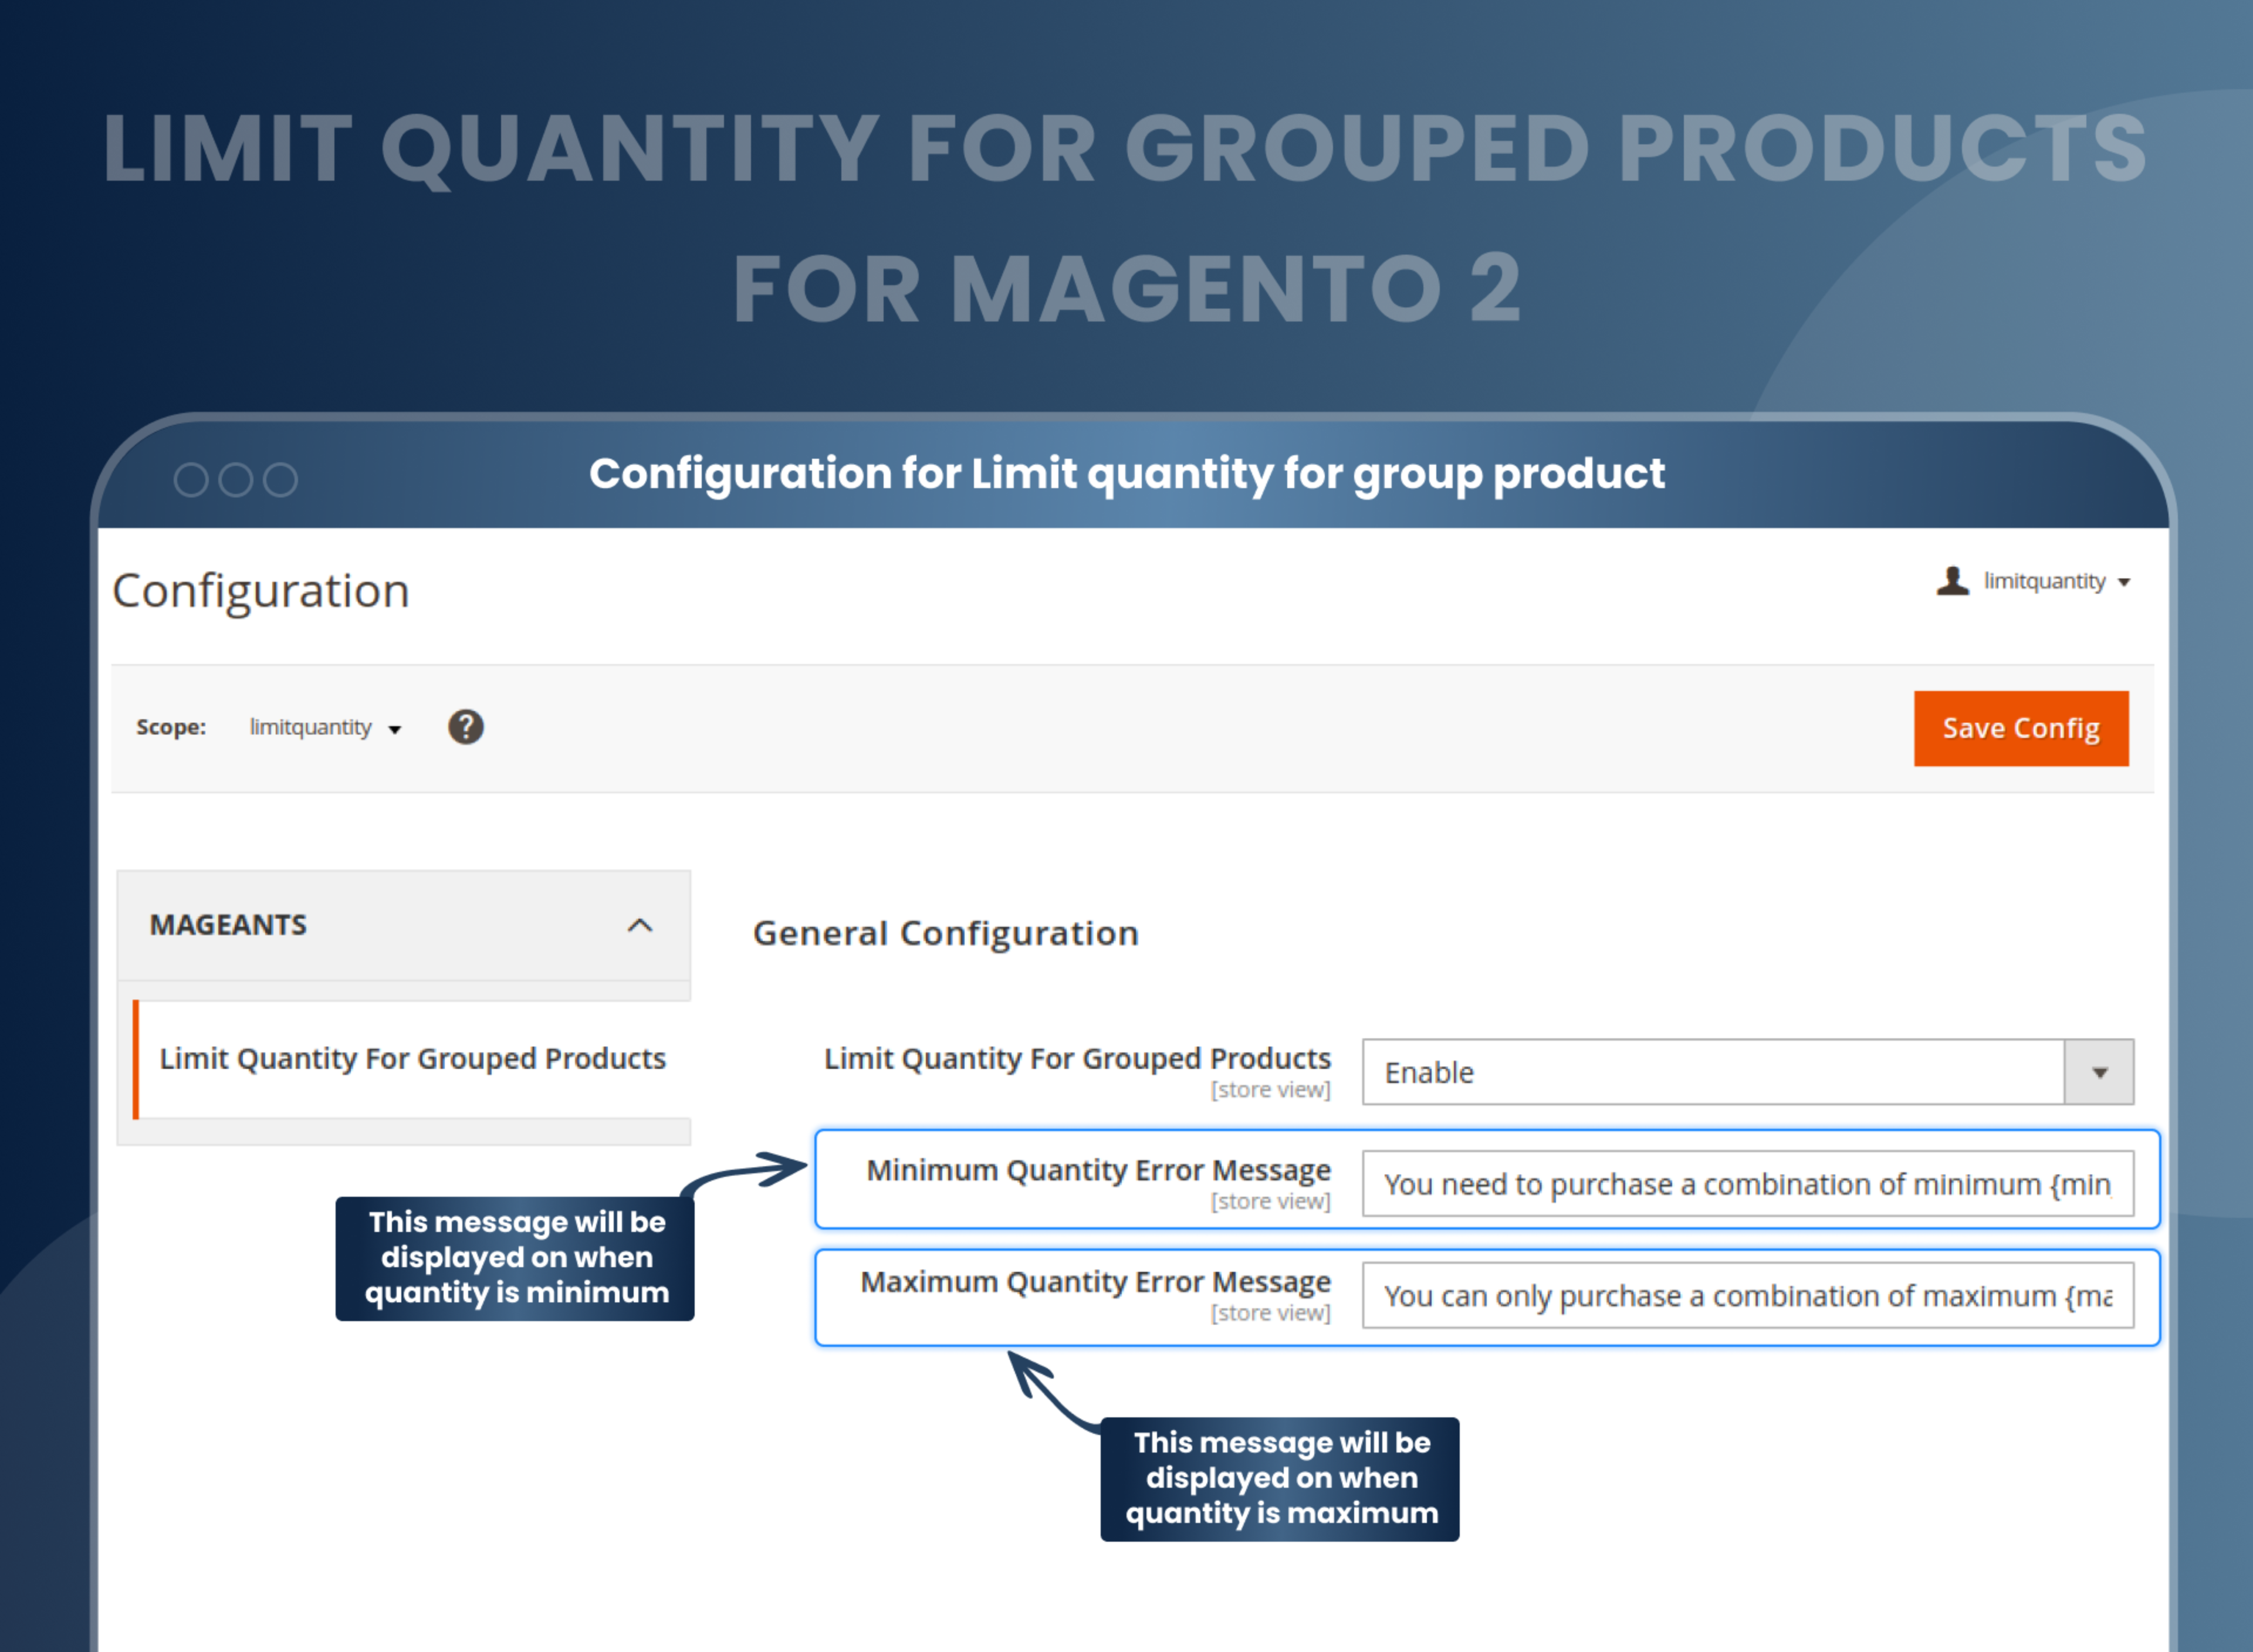 Configuration for Limit quantity for group product